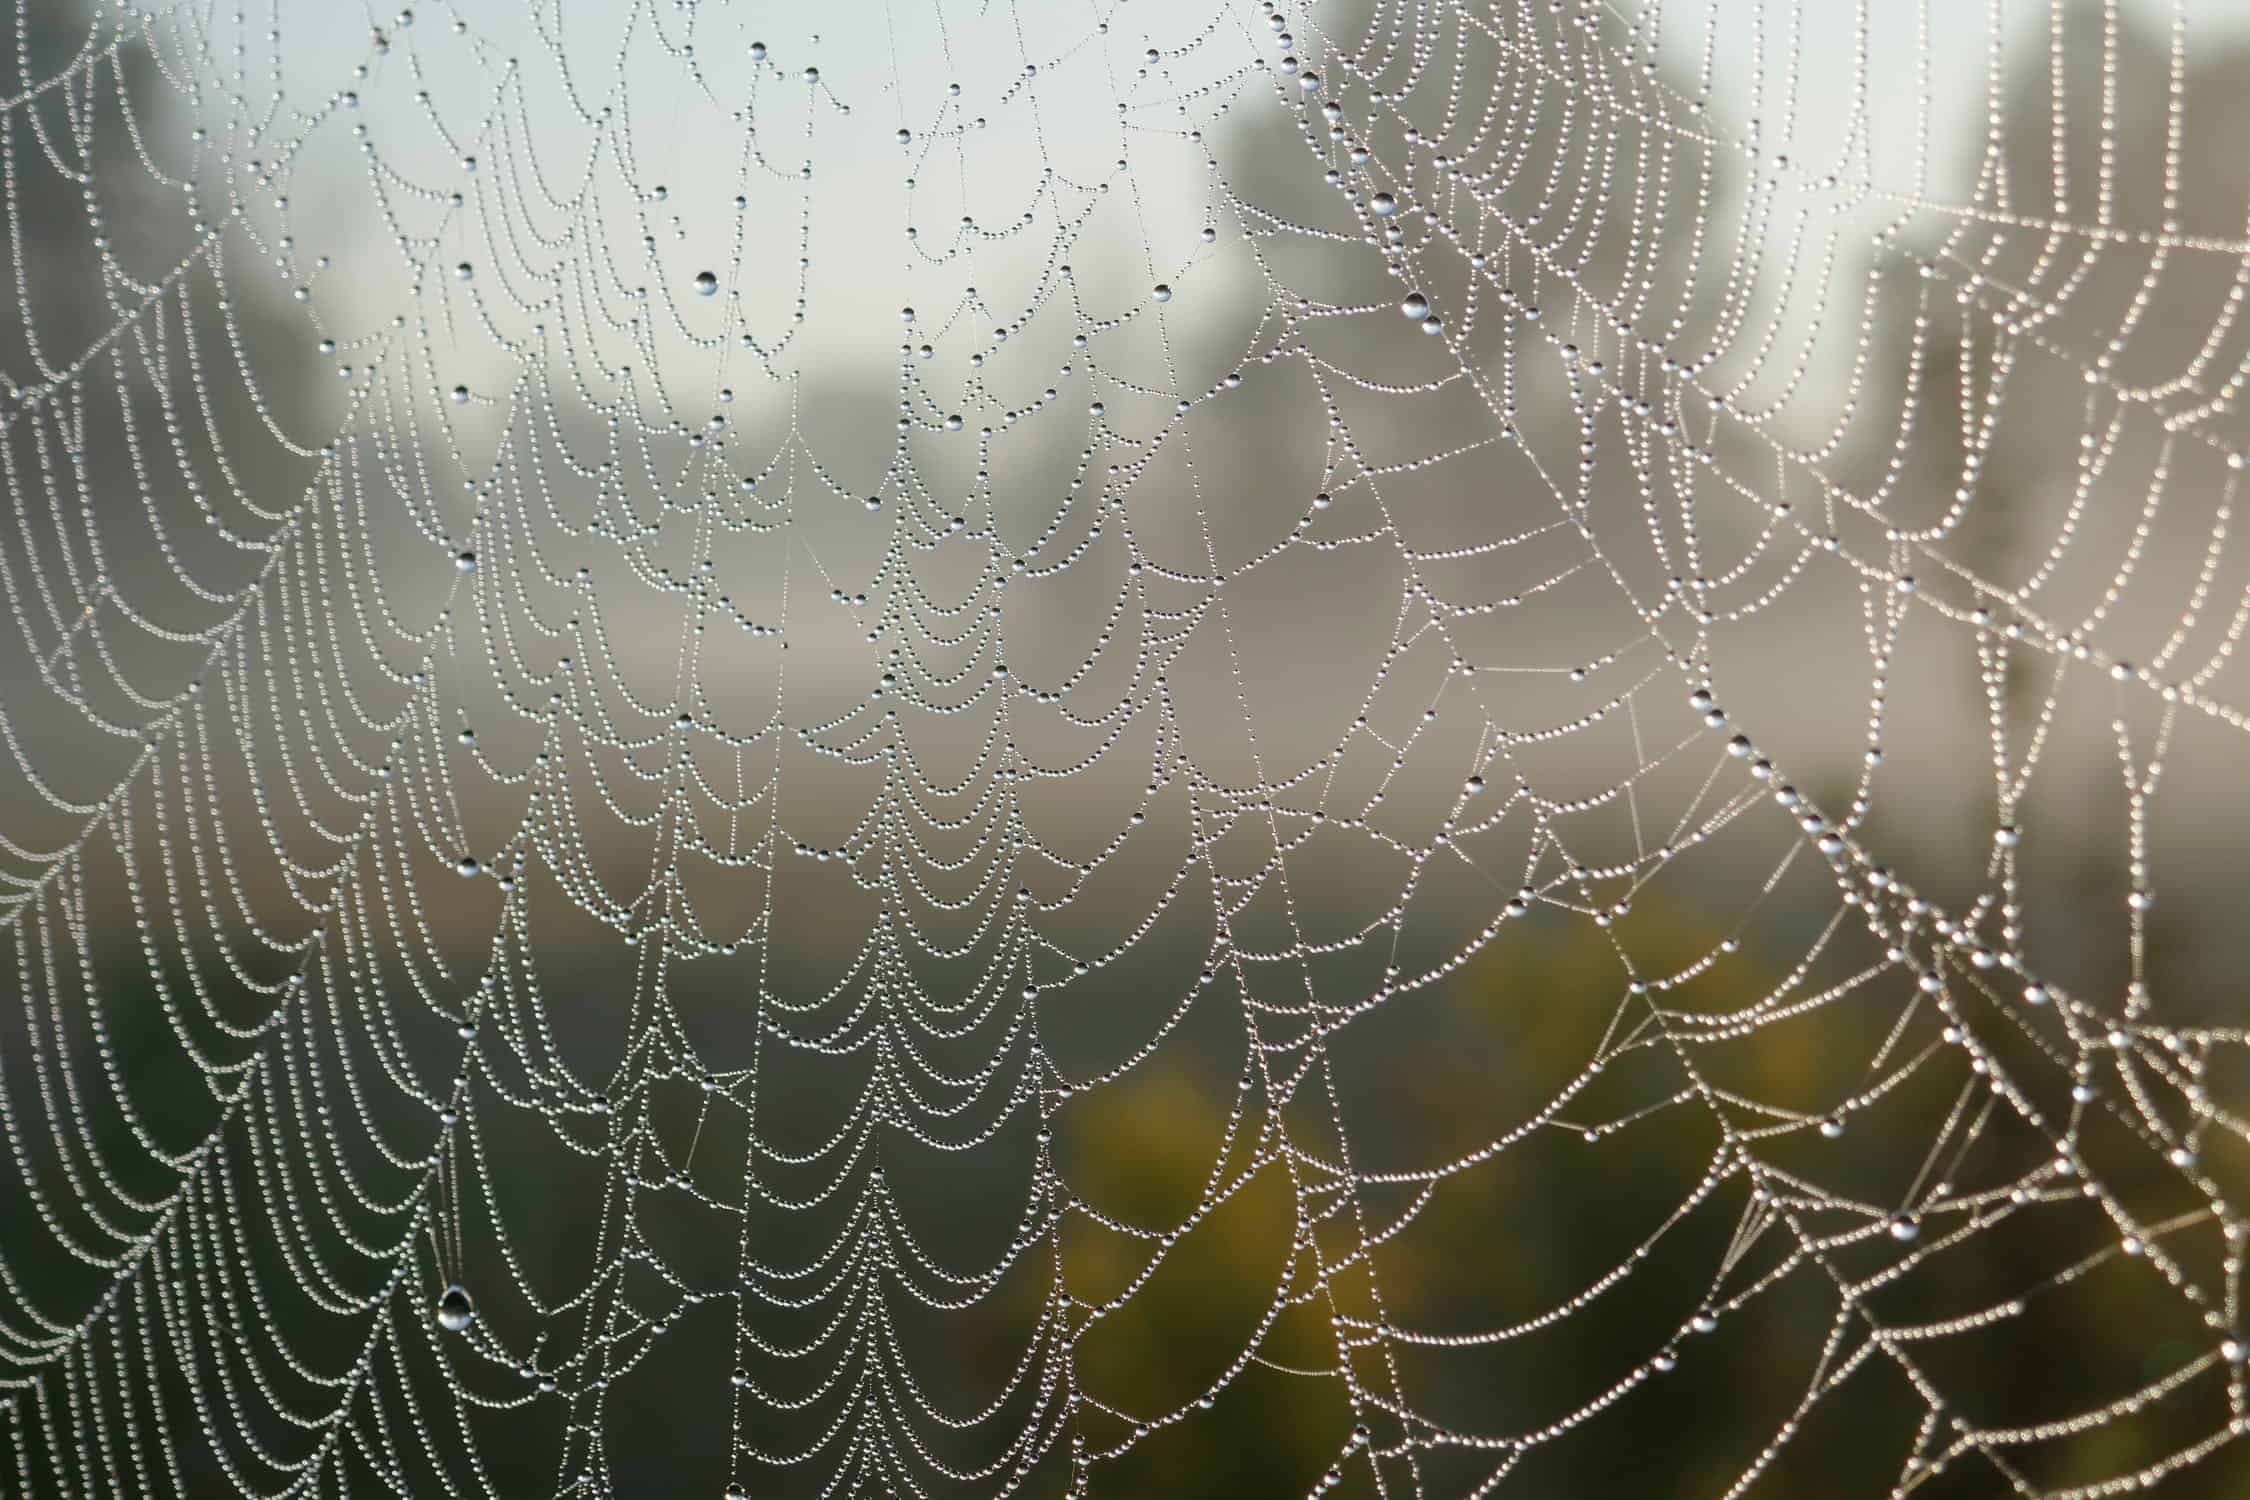 Deal With Spiderwebs On Your Patio (For Good)